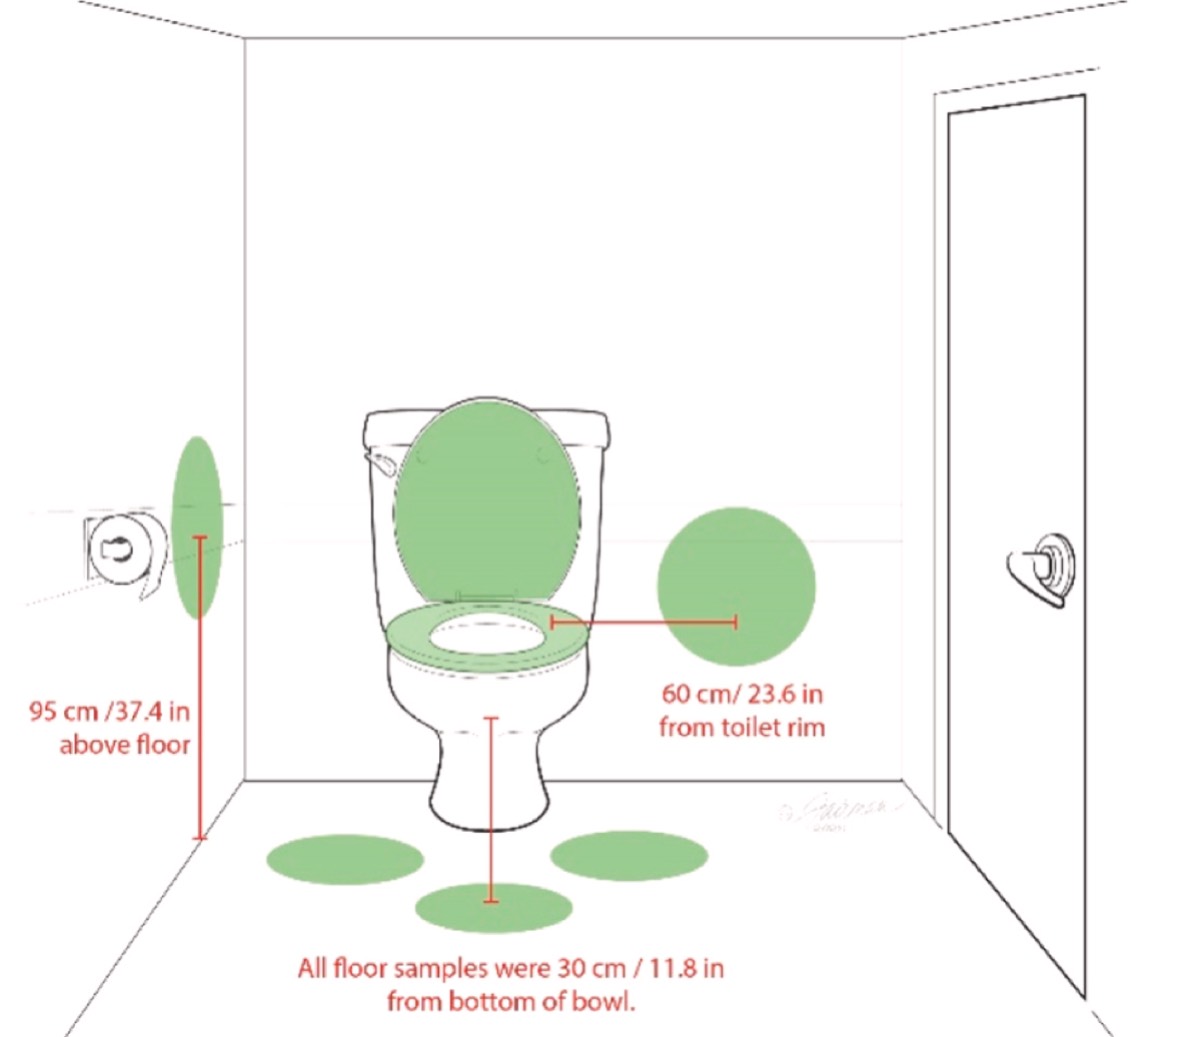 What does FLUSH mean? - Definition of FLUSH - FLUSH stands for Fish Leaving  Under Several Hypotheses. By